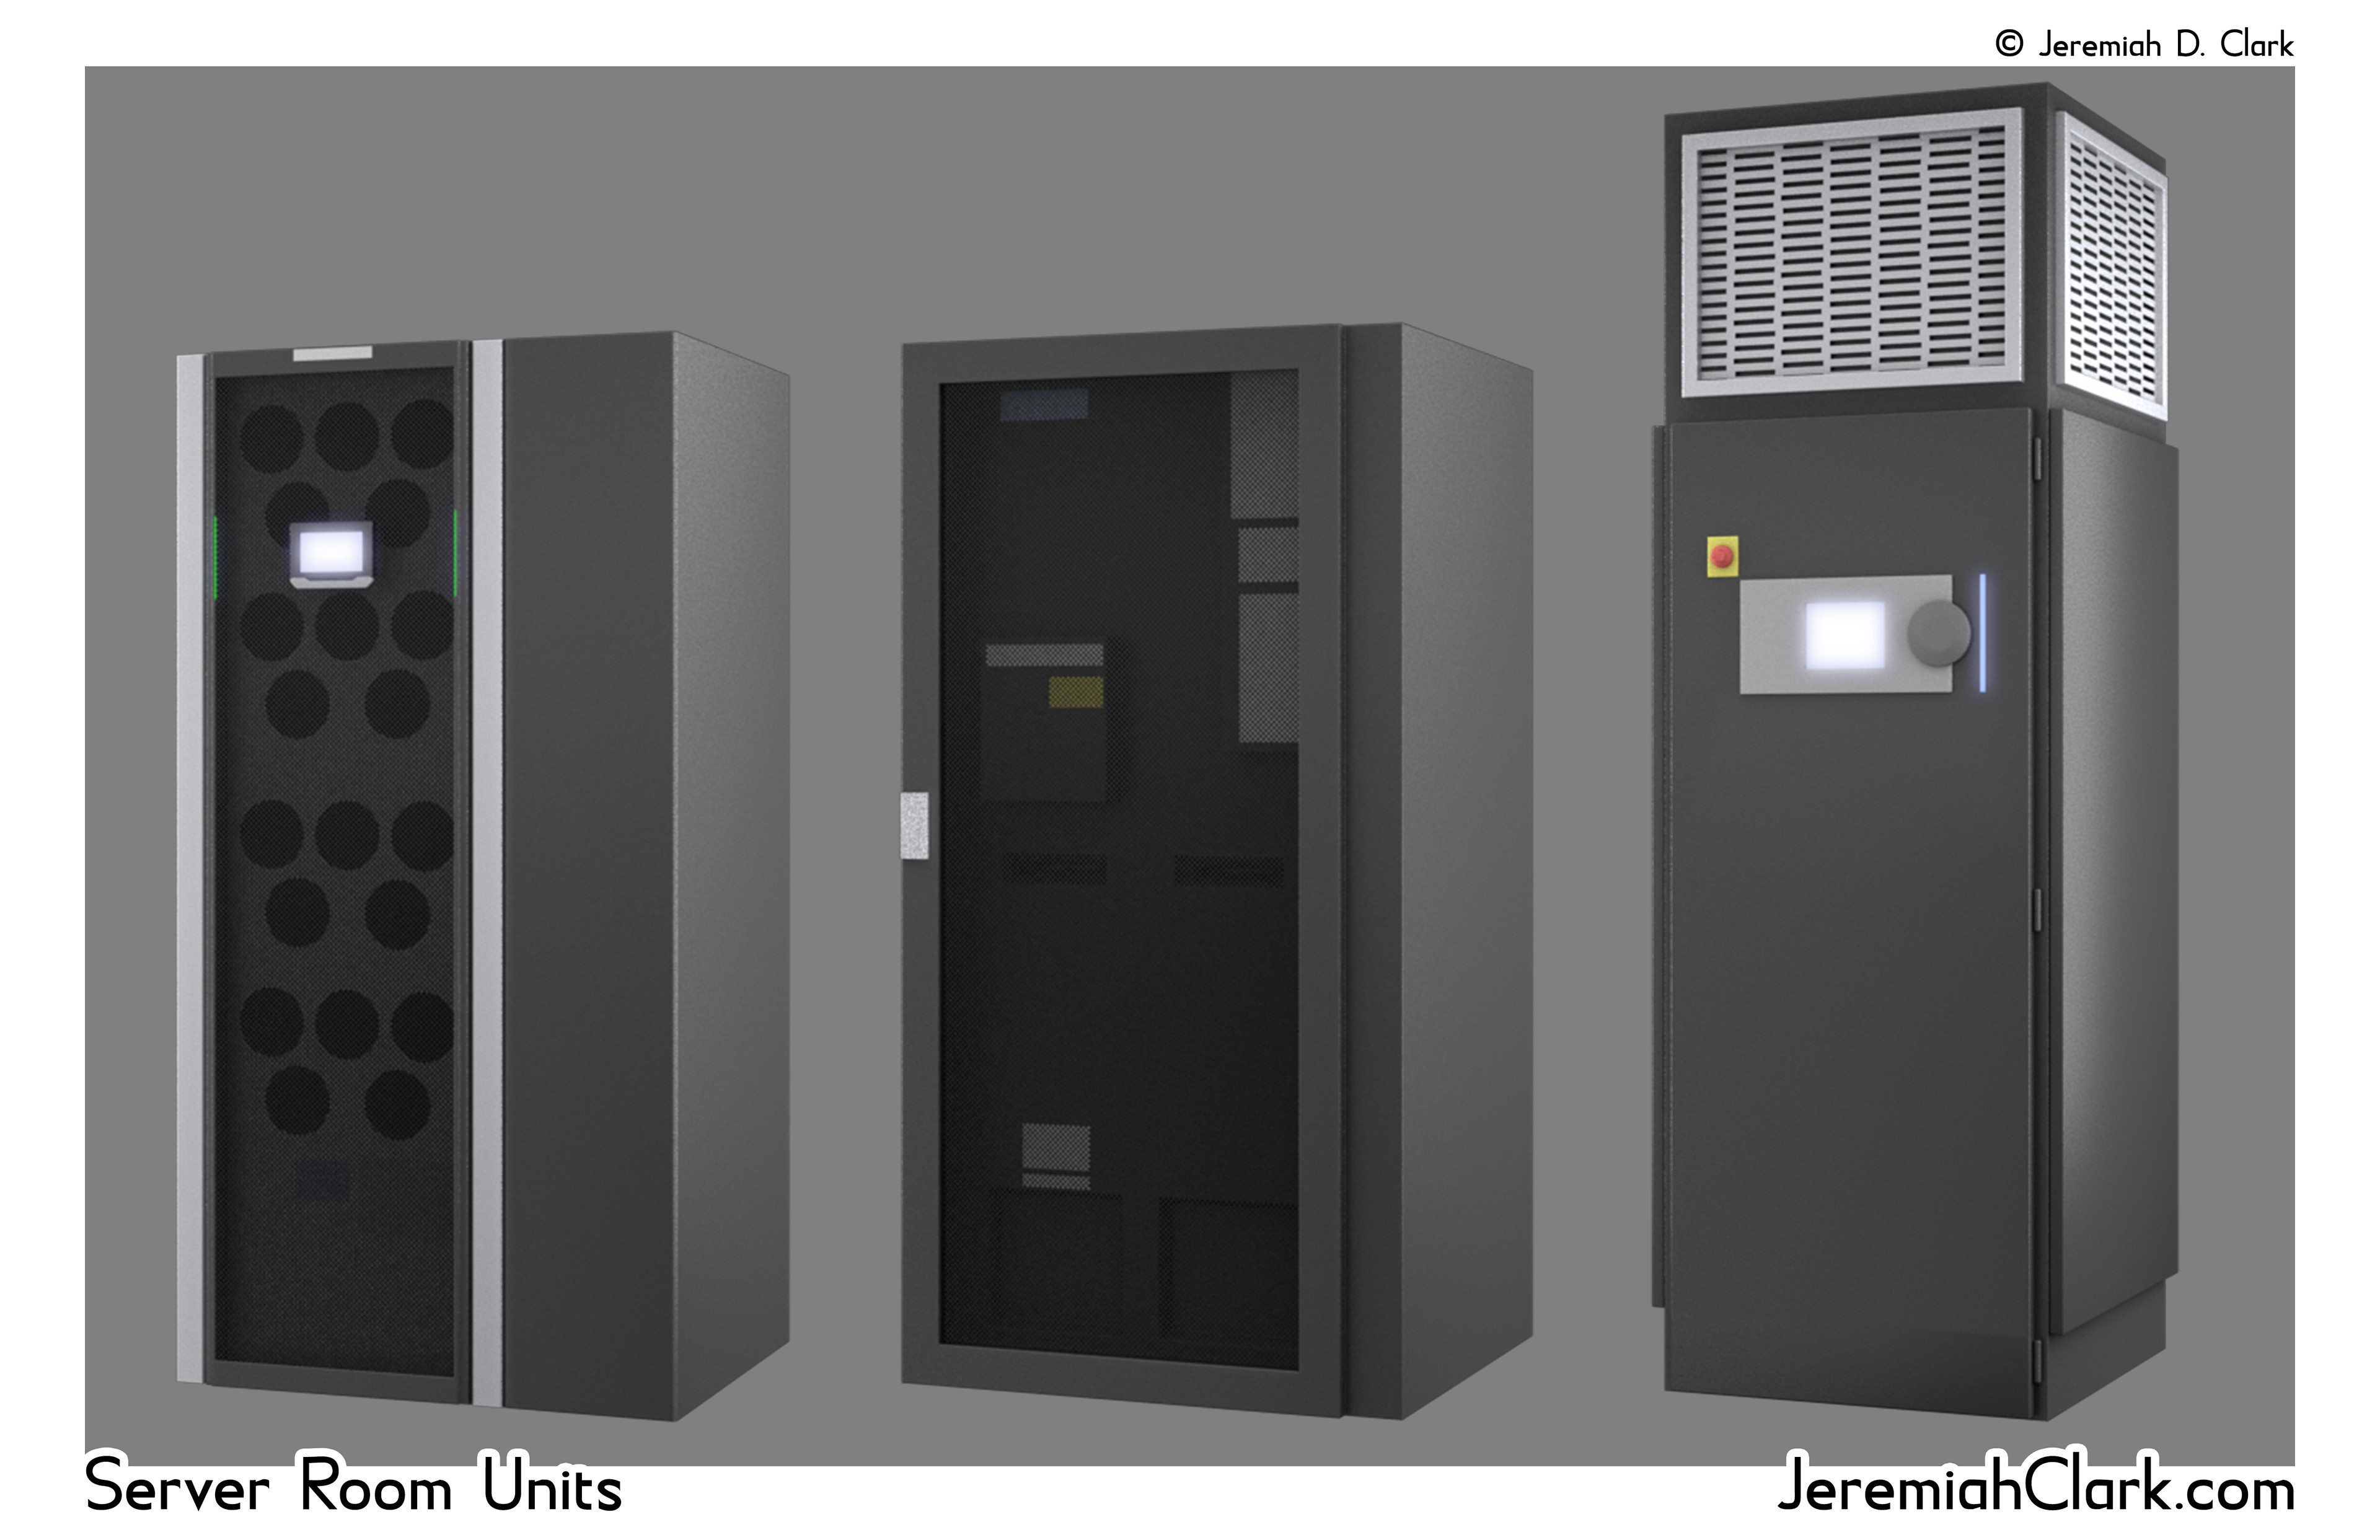 Detailed renders of some of the server cabinets.
Modeled, textured, and rendered in Modo.